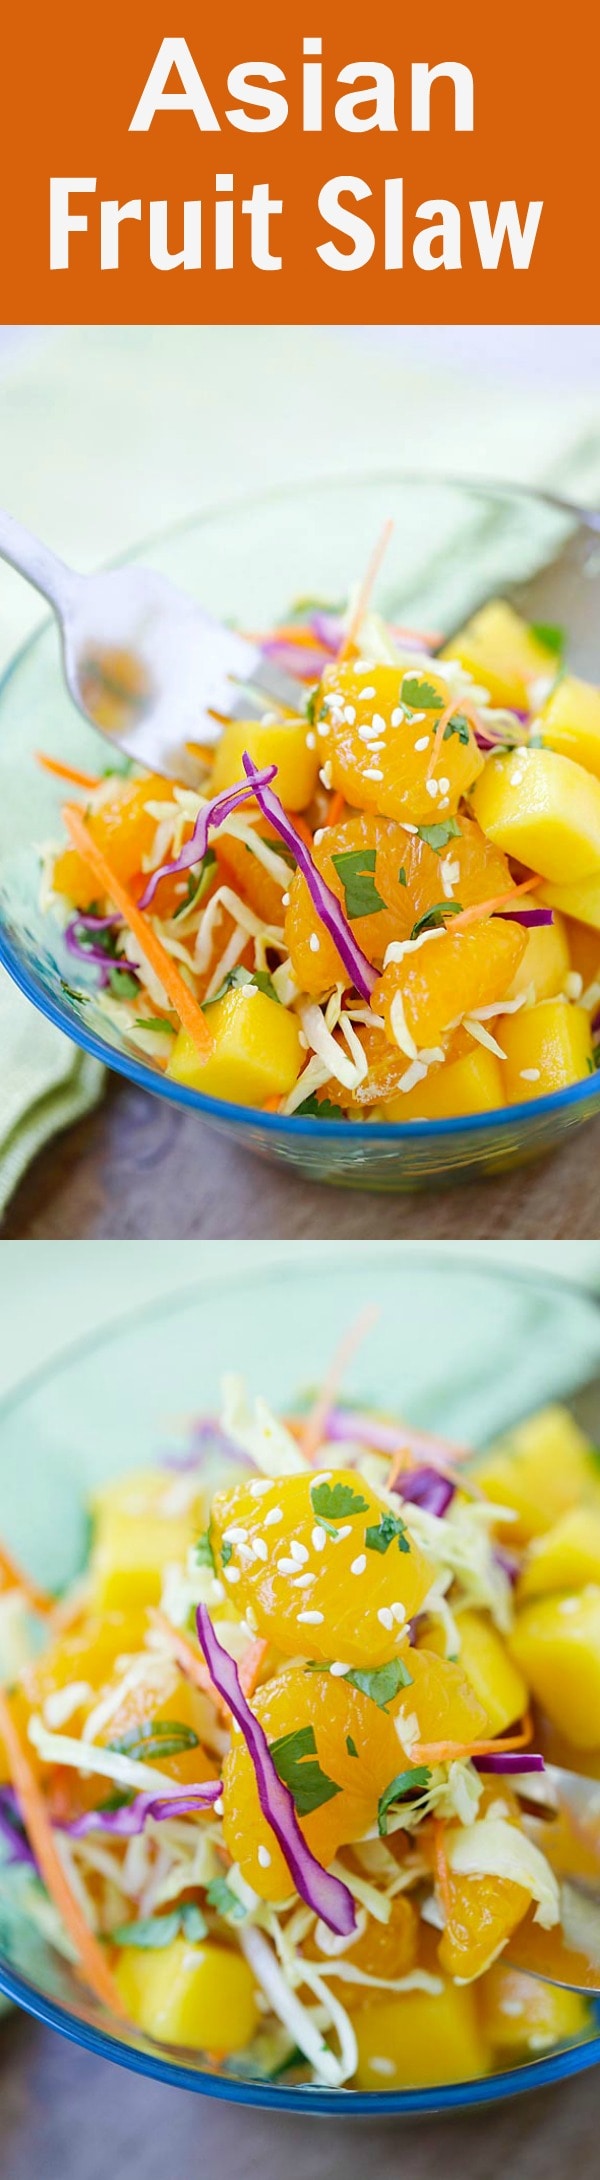 Asian Fruit Slaw - healthy, low-calorie, and delicious Asian fruit salad recipe that makes you feel good every day, so light and refreshing! | rasamalaysia.com